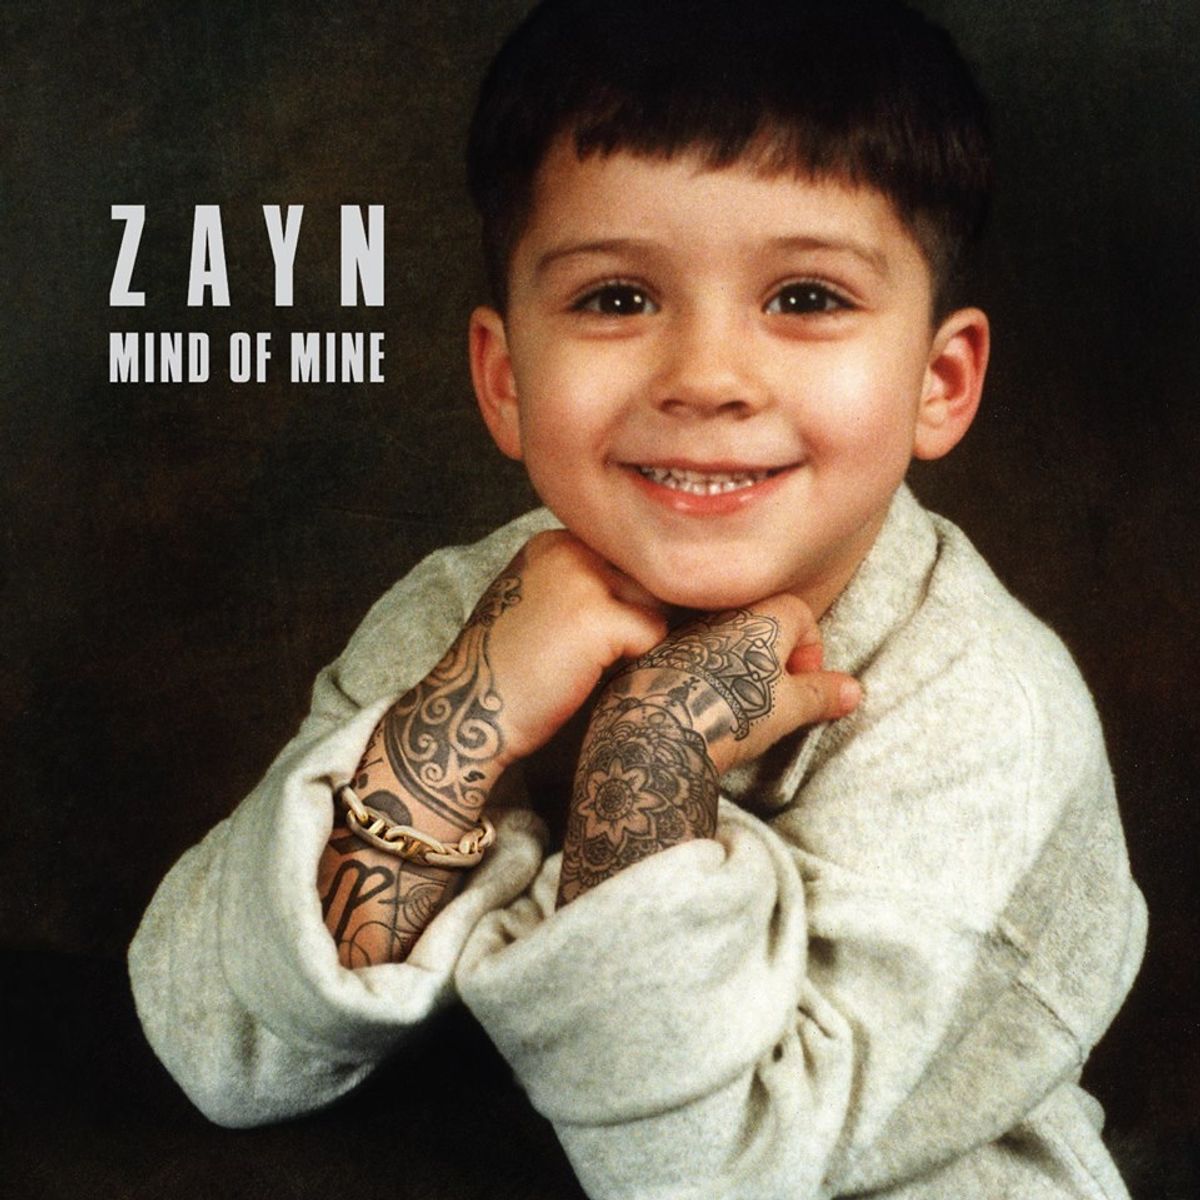 Track by Track Review: Mind of Mine - Zayn